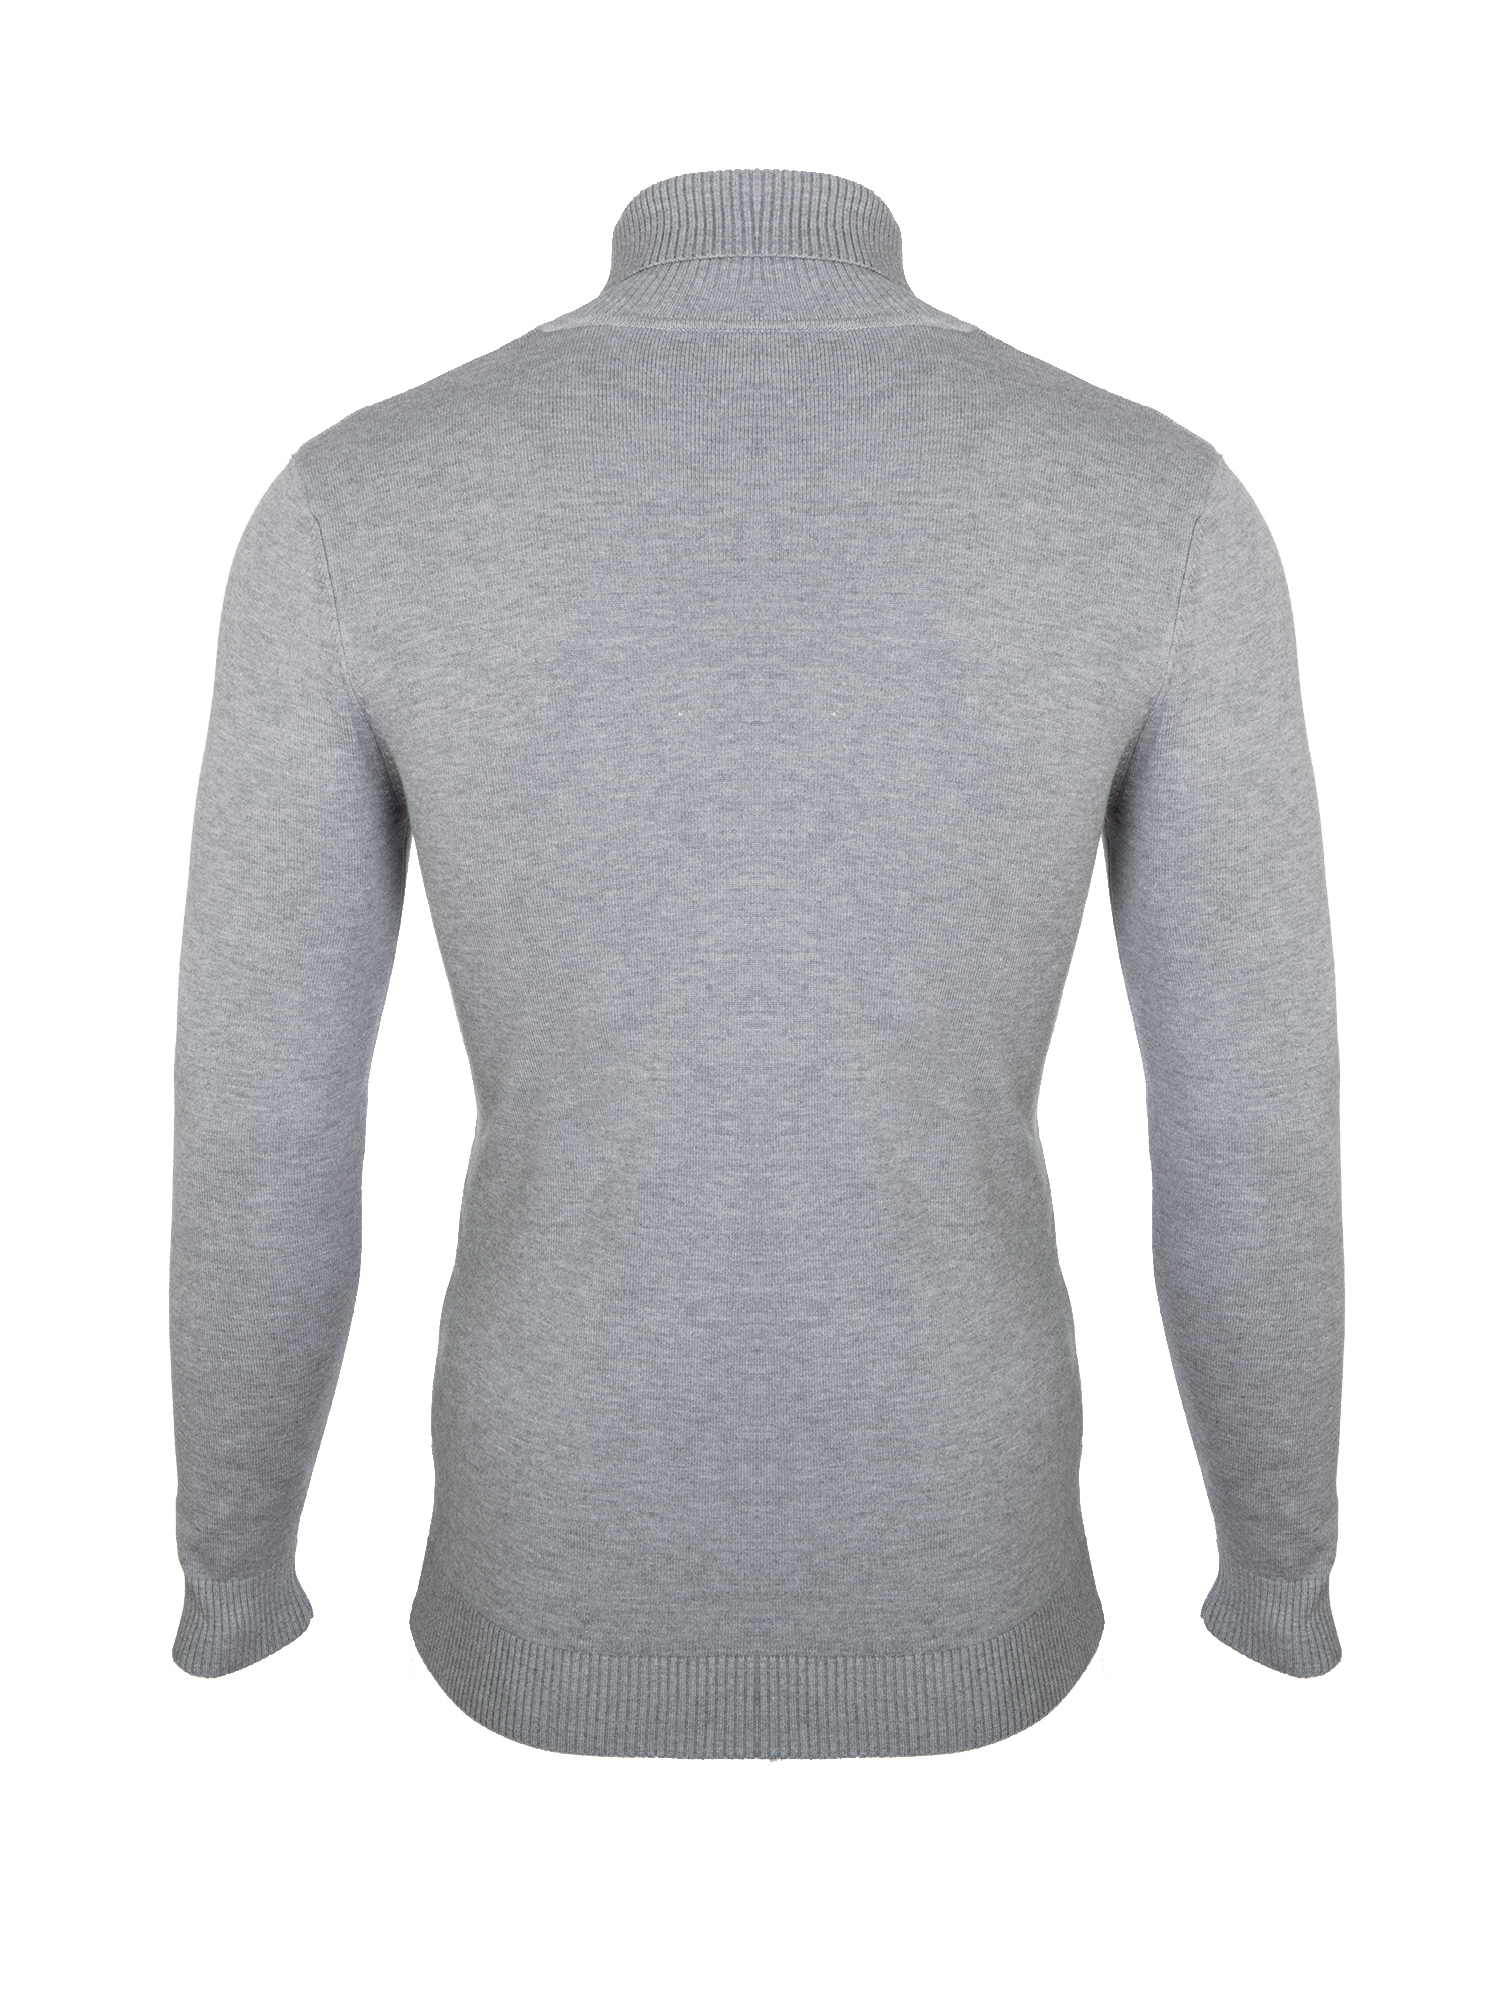 SAYFUT Fashion Men Long Sleeves Turtleneck Sweater Tops Slim Fit Knitted Turtleneck Pullover Sweaters,Black/Gray - image 4 of 8